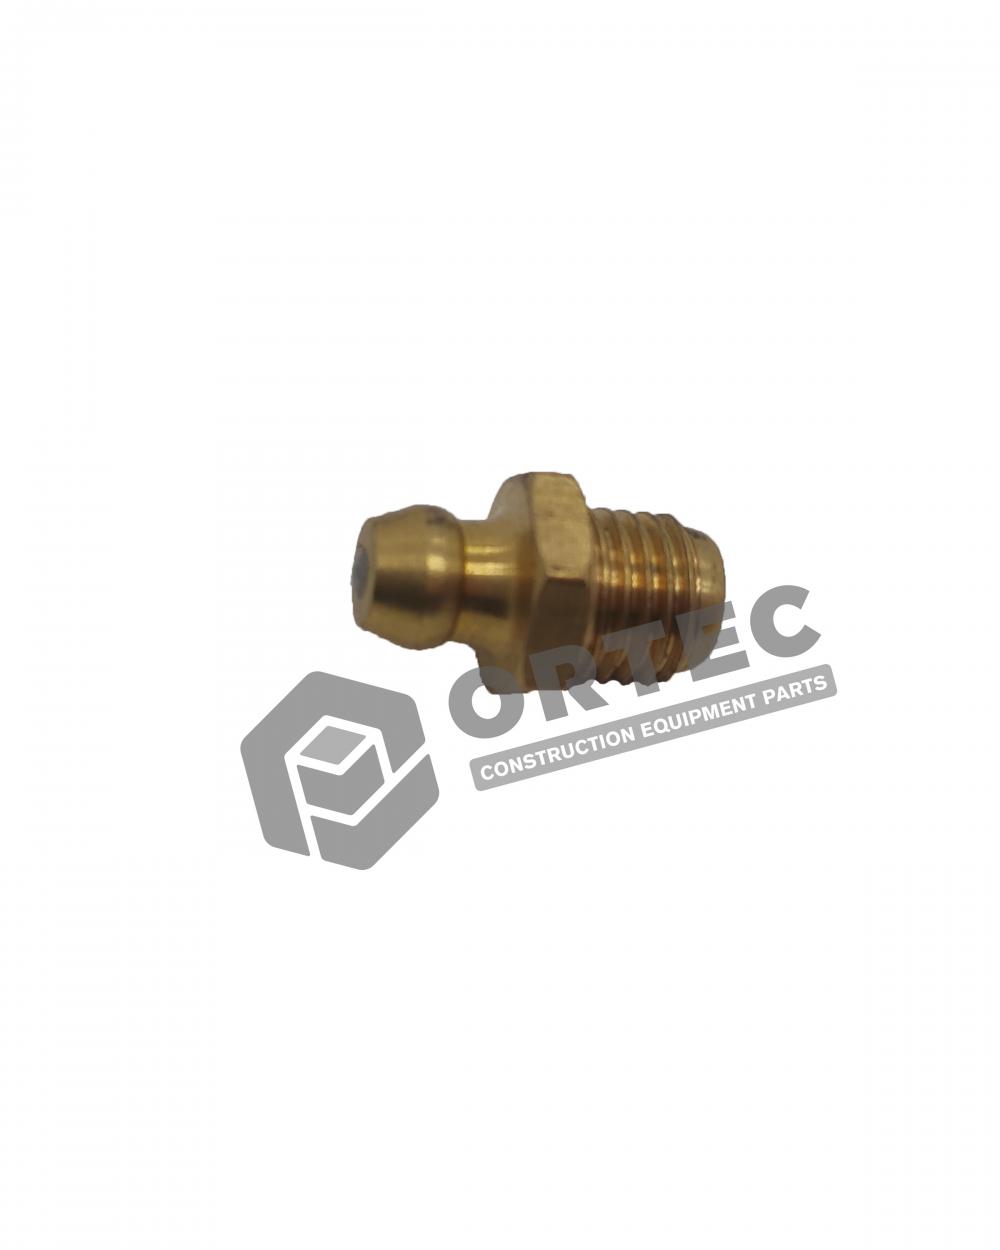 Grease Nozzle 4110001174139 Suitable for LGMG MT88